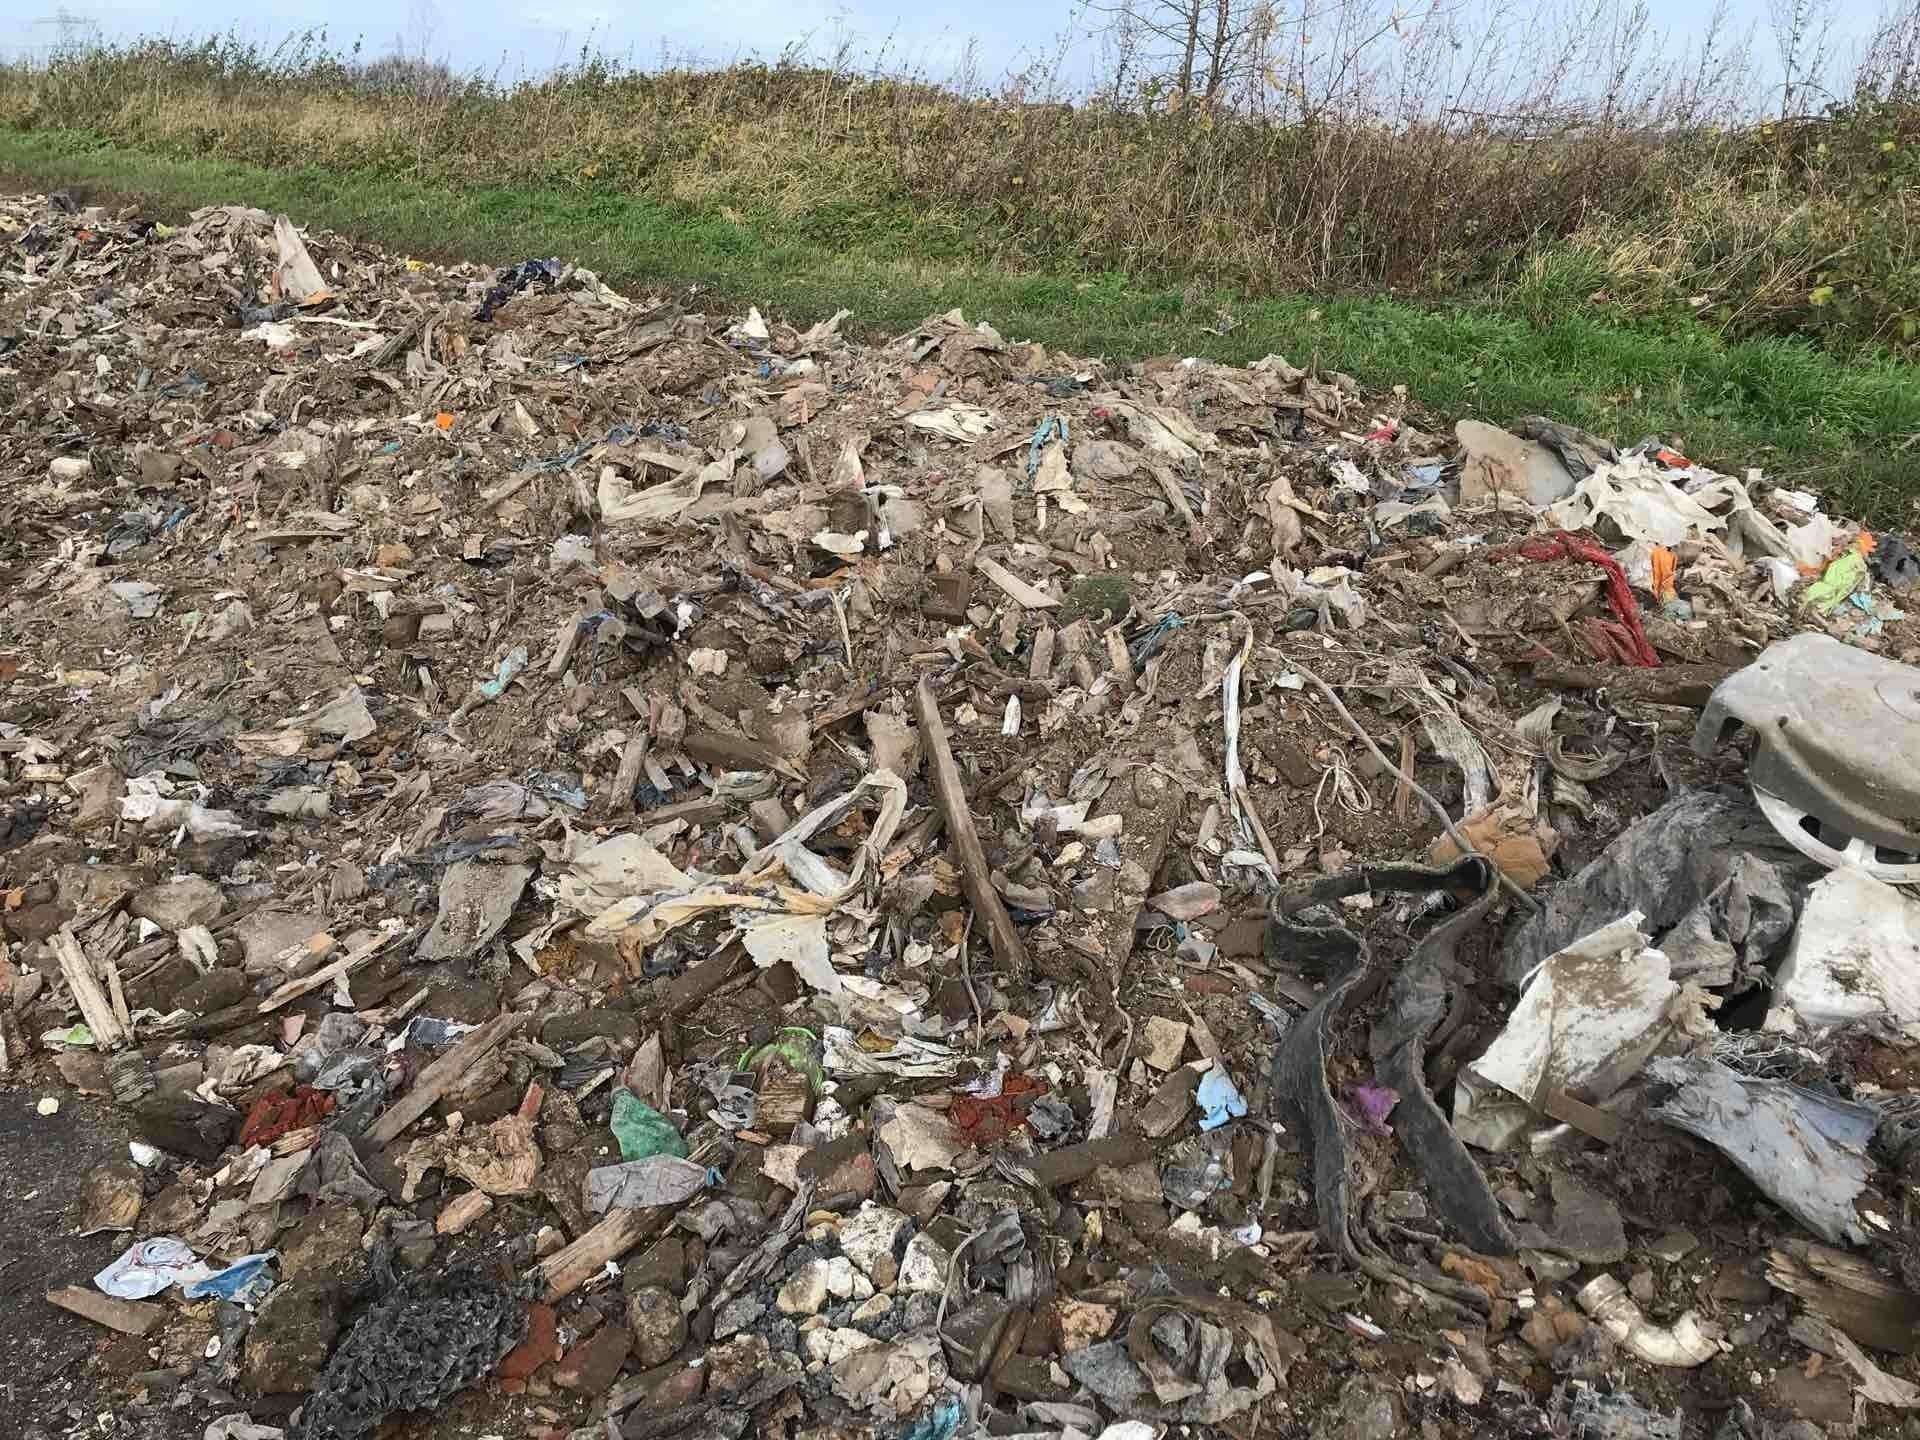 The rubble blocked the road and council leader Cllr Jeremy Kite said it could have led to a serious problem if emergency services needed to get through. Picture: Dartford Borough Council